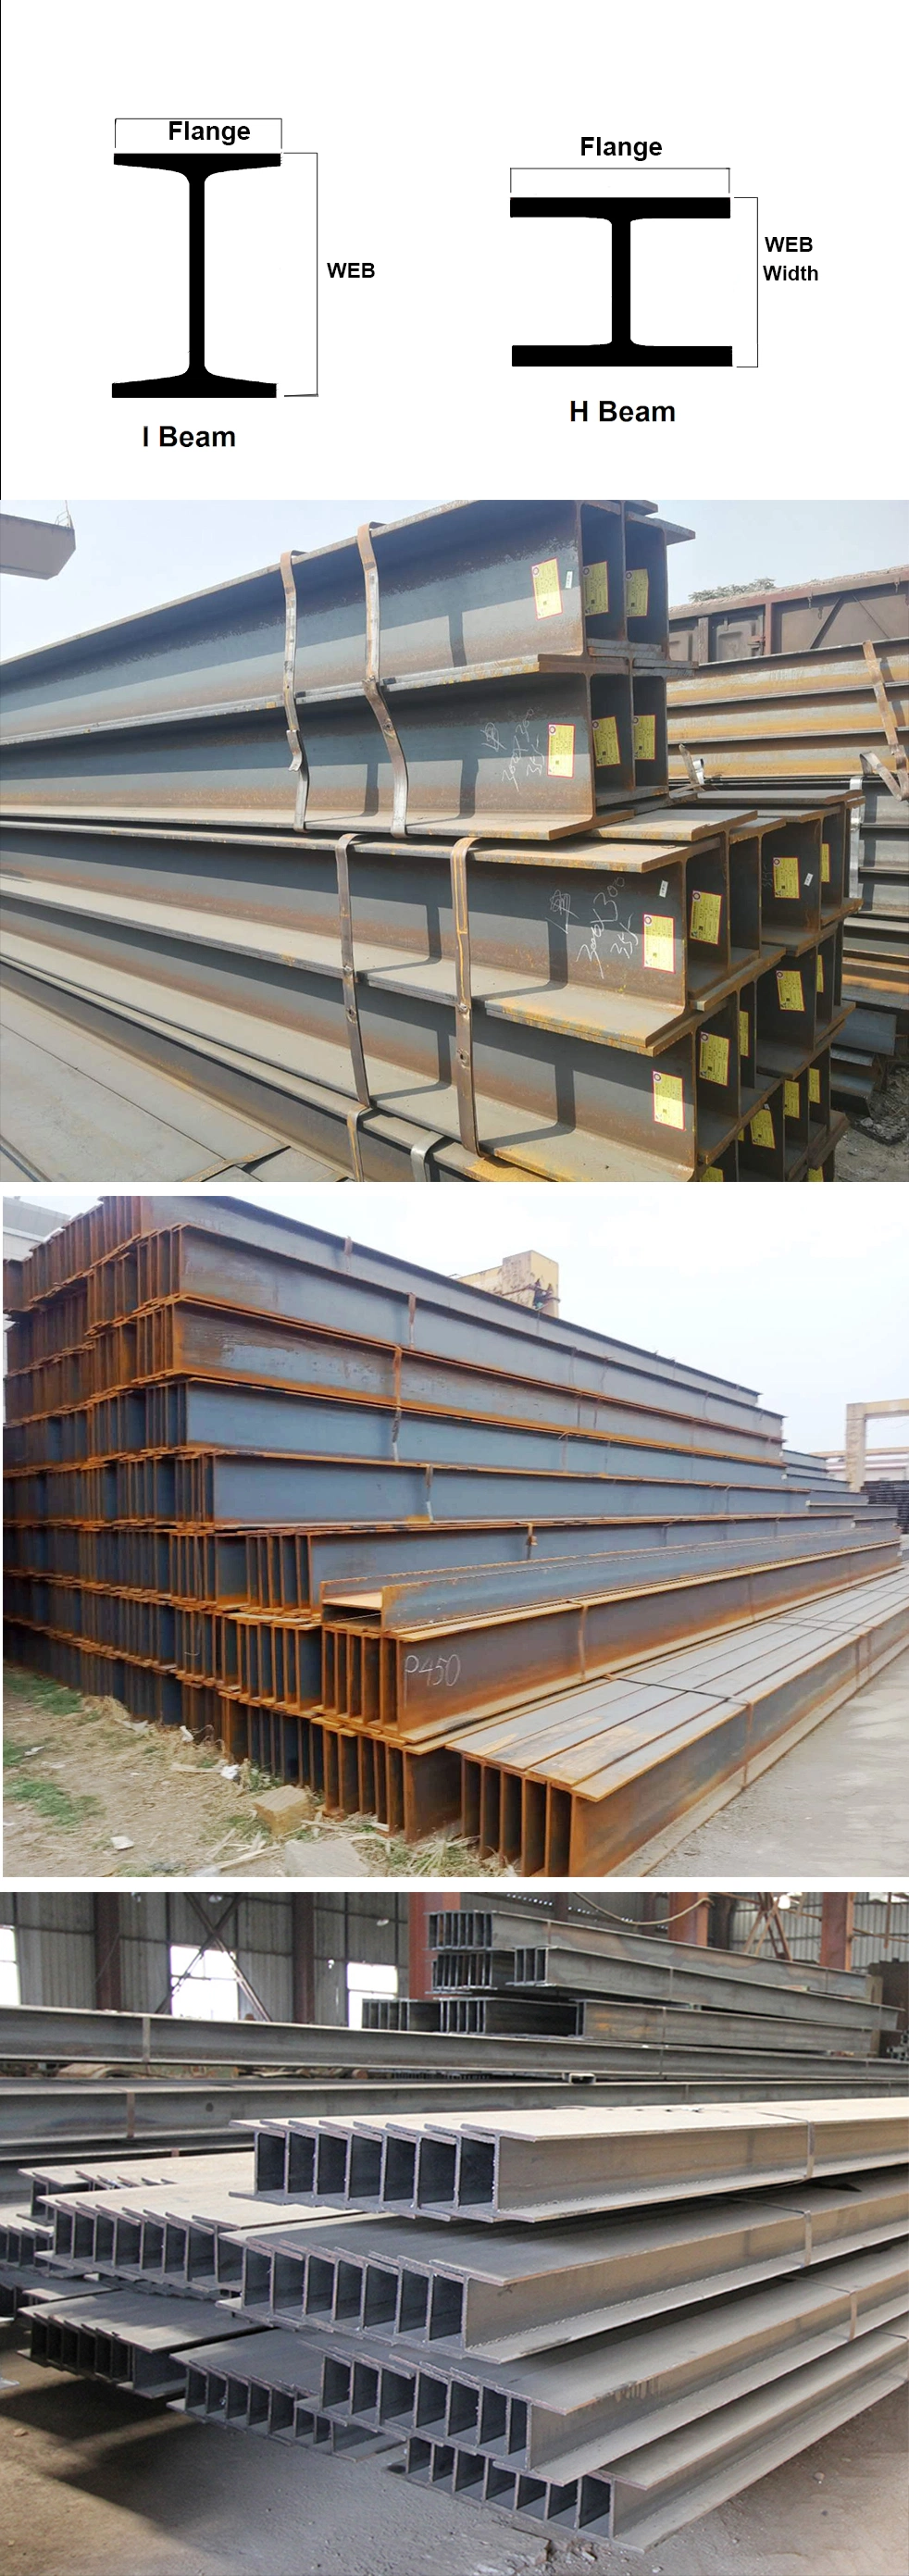 H Beam Steel Q235B Q345b Ss400 Structural Steel Profile I Roof Support Beams H Shape H-Beam